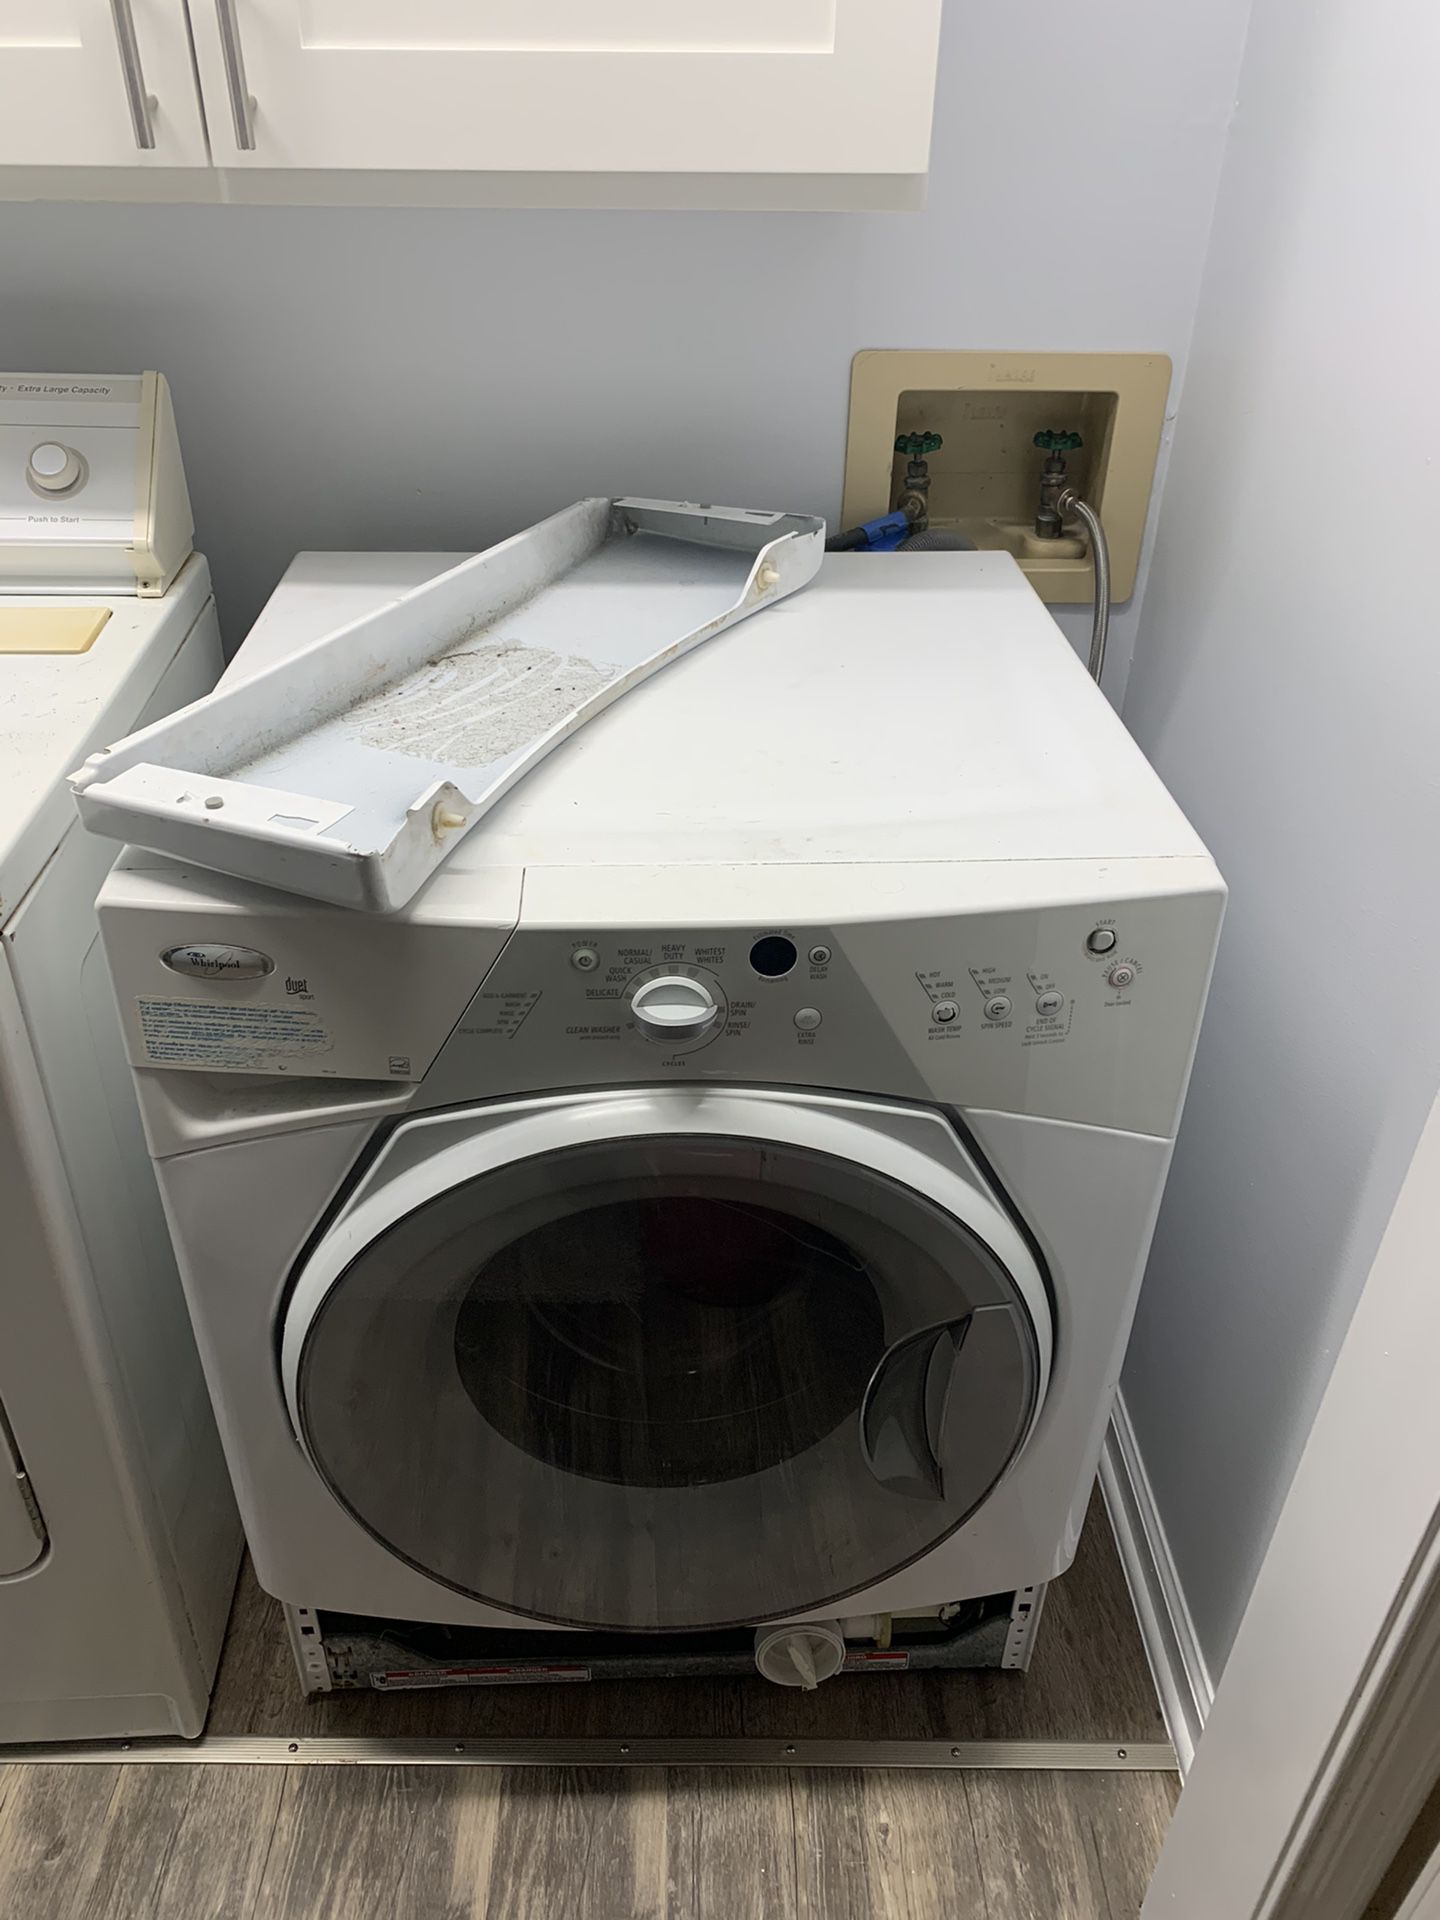 Whirlpool washer for free.